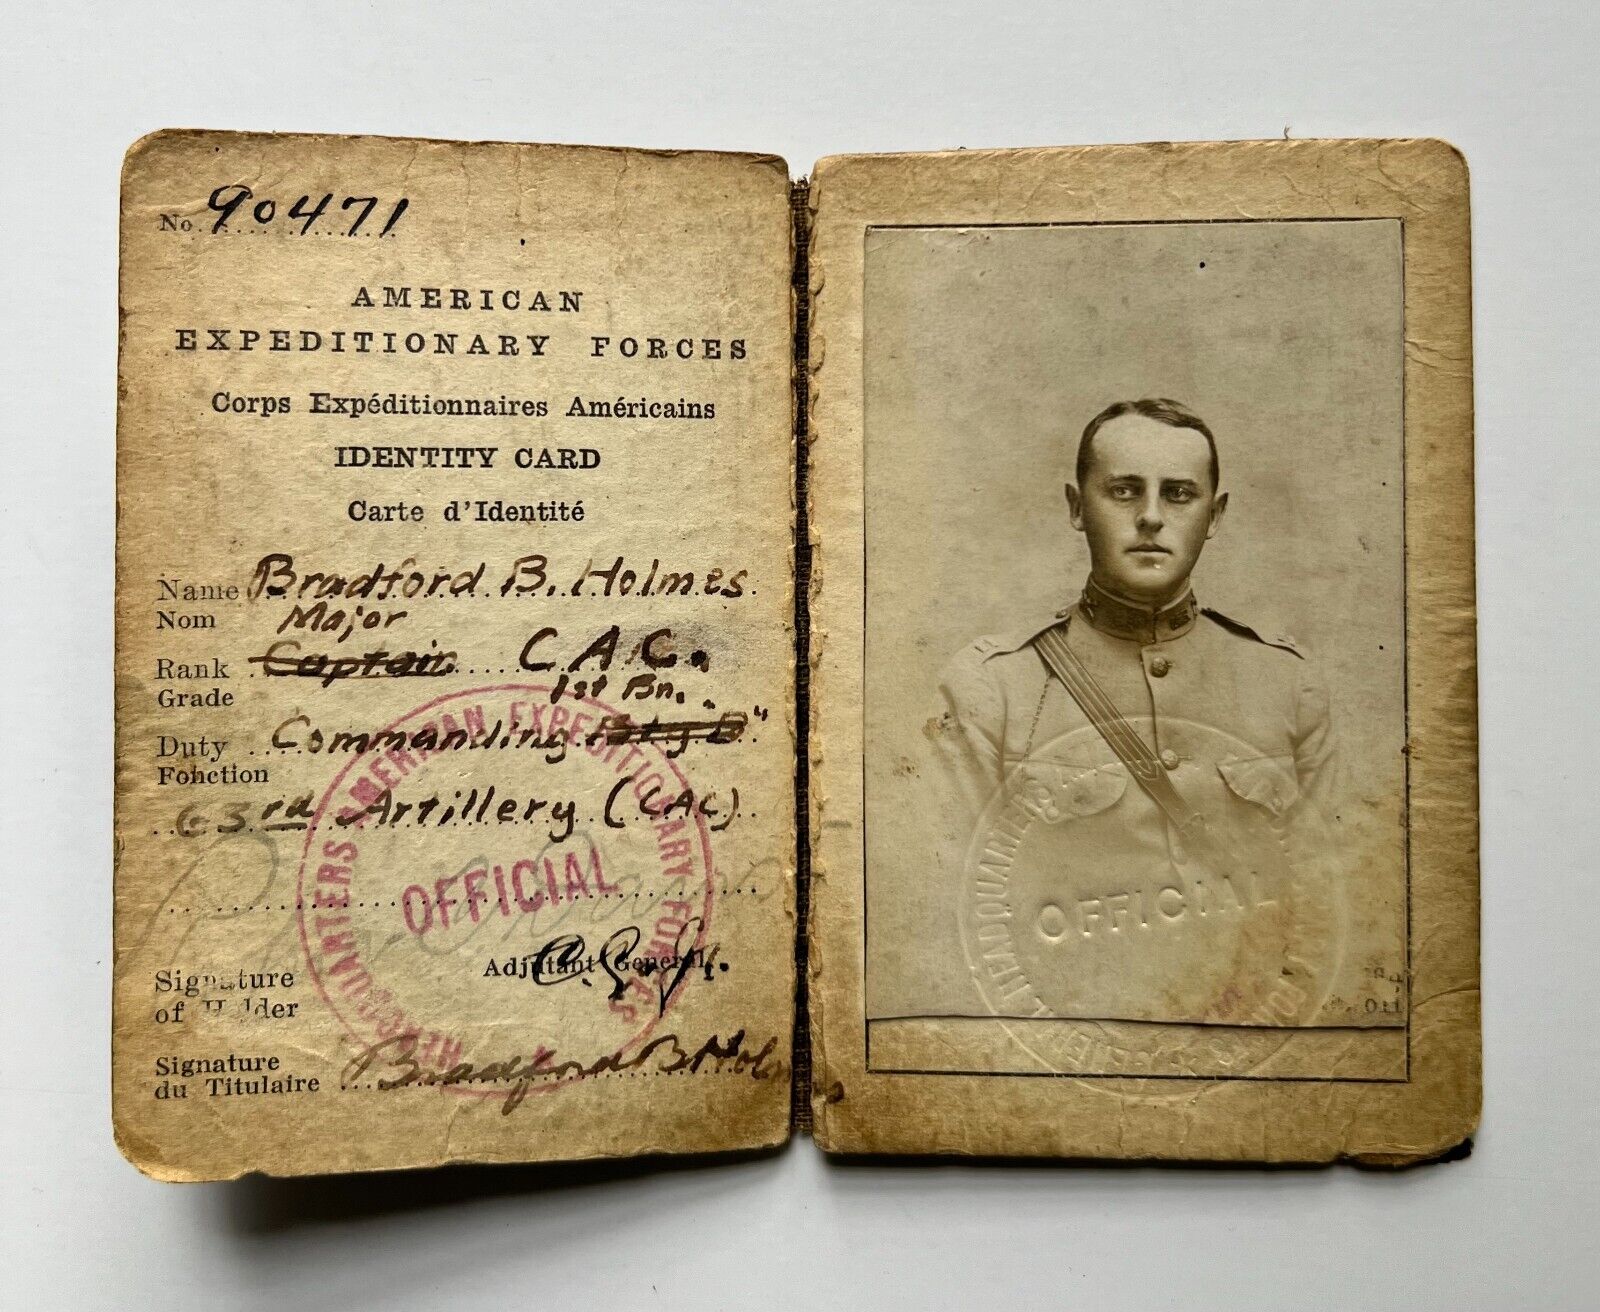 Identification card for American Expeditionary Forces WWI